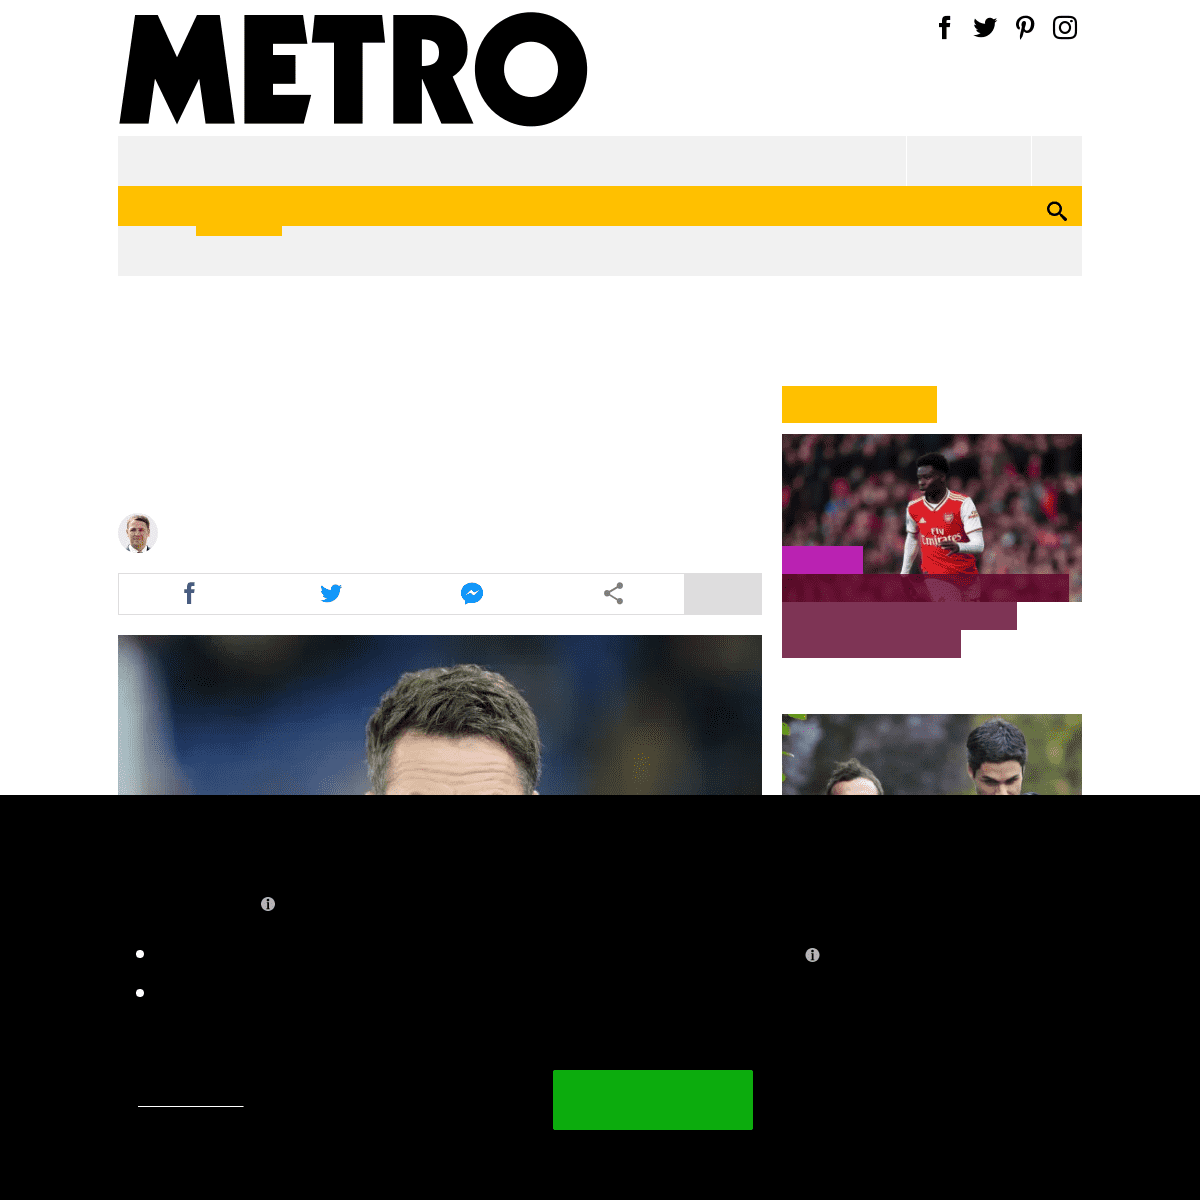 A complete backup of metro.co.uk/2020/02/17/michael-owens-champions-league-predictions-including-atletico-madrid-vs-liverpool-12